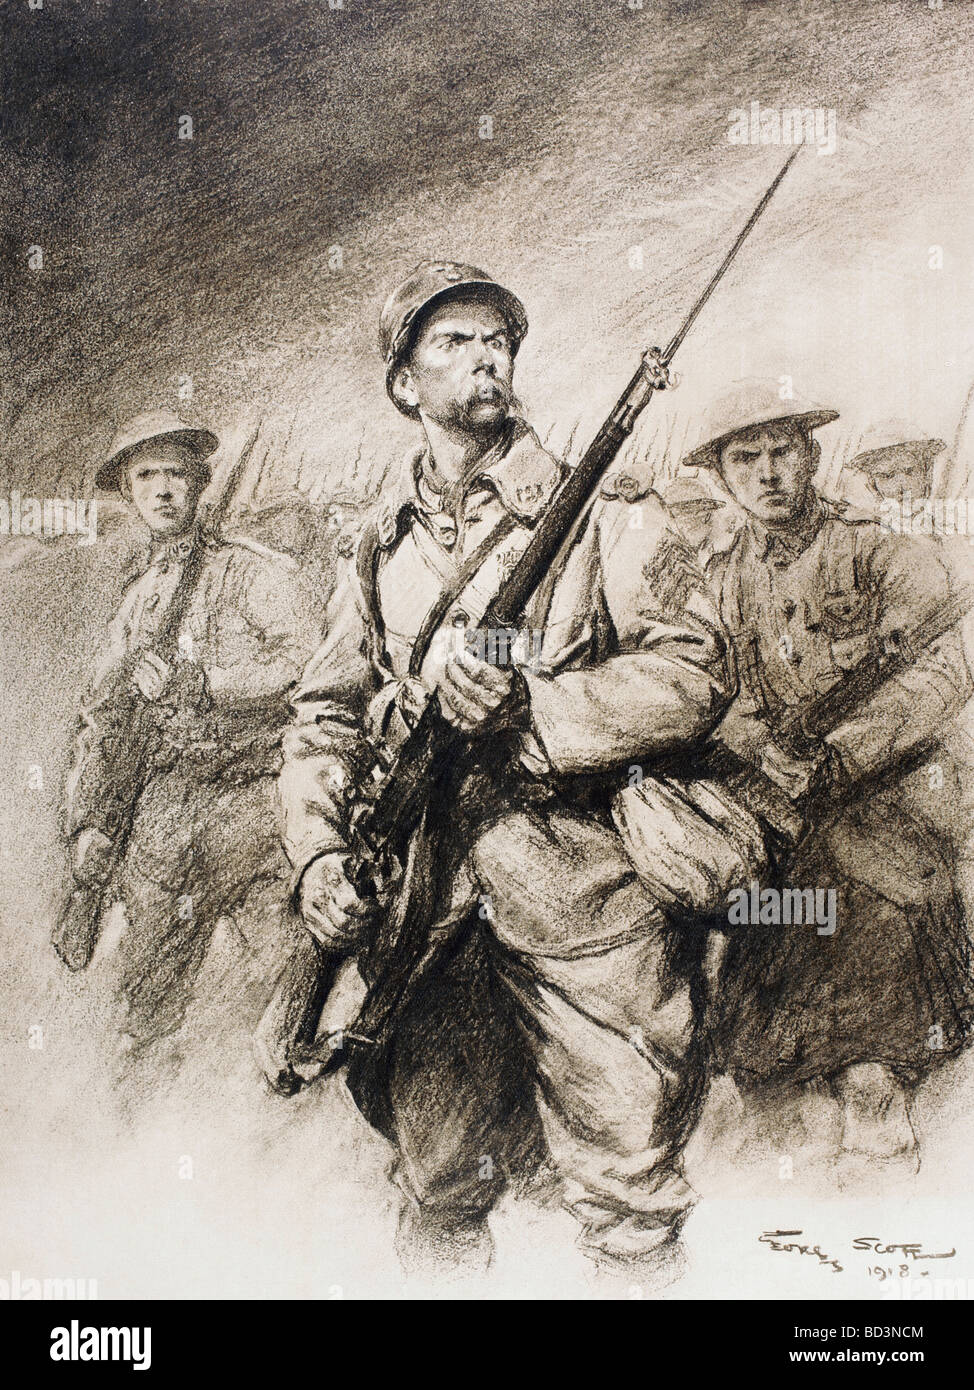 Foch's soldiers.  Showing French, Scottish, British and American soldiers with fixed bayonets. Stock Photo